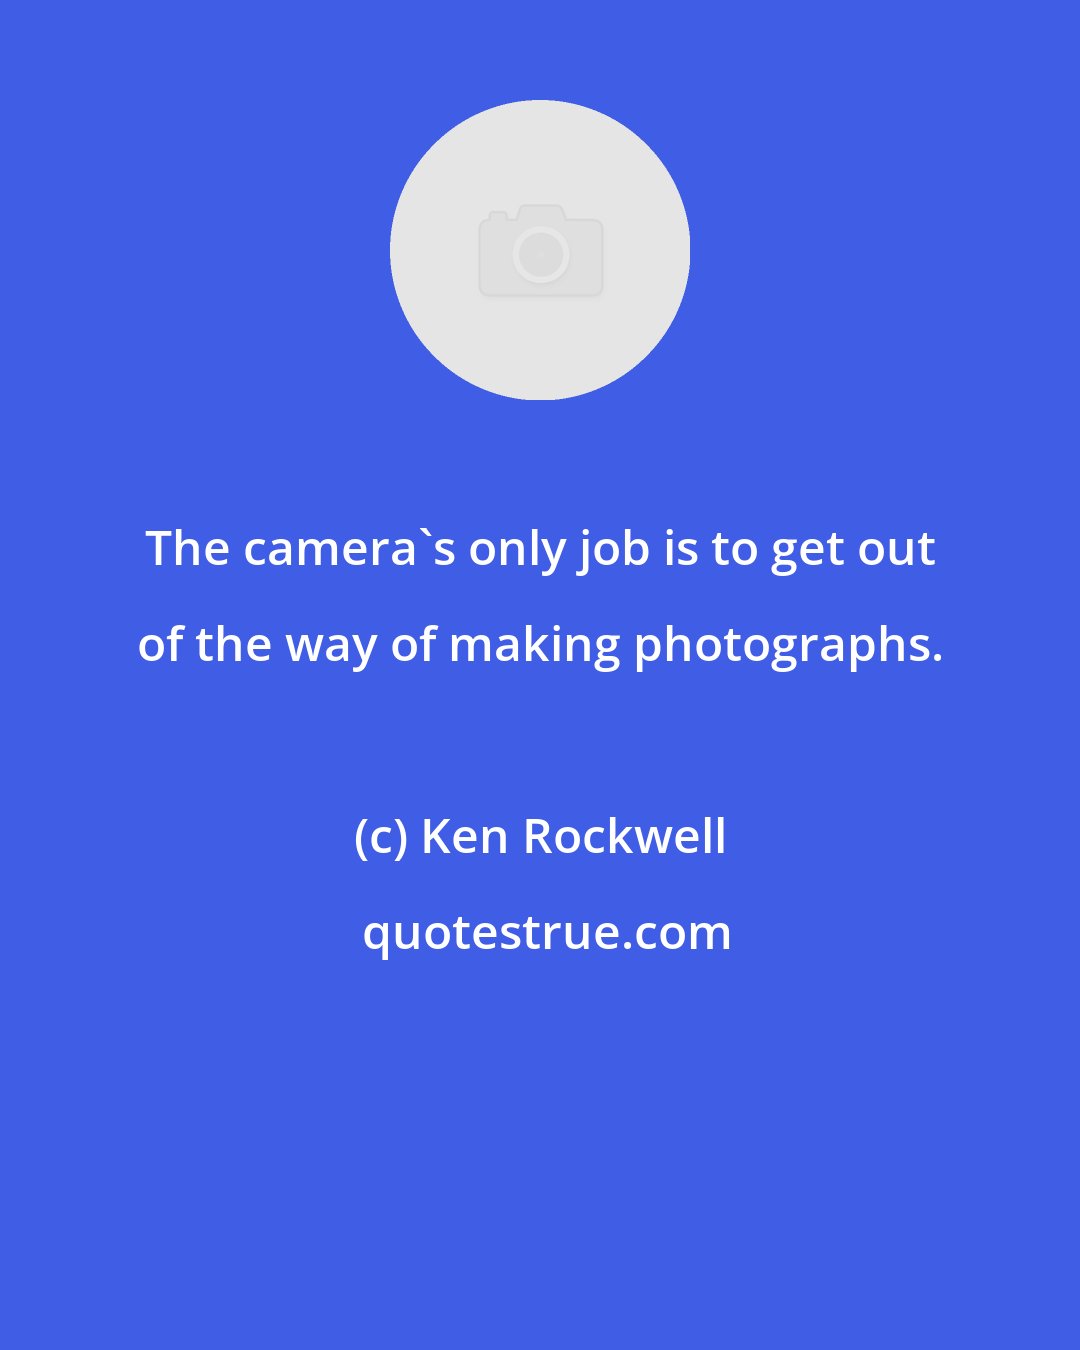 Ken Rockwell: The camera's only job is to get out of the way of making photographs.